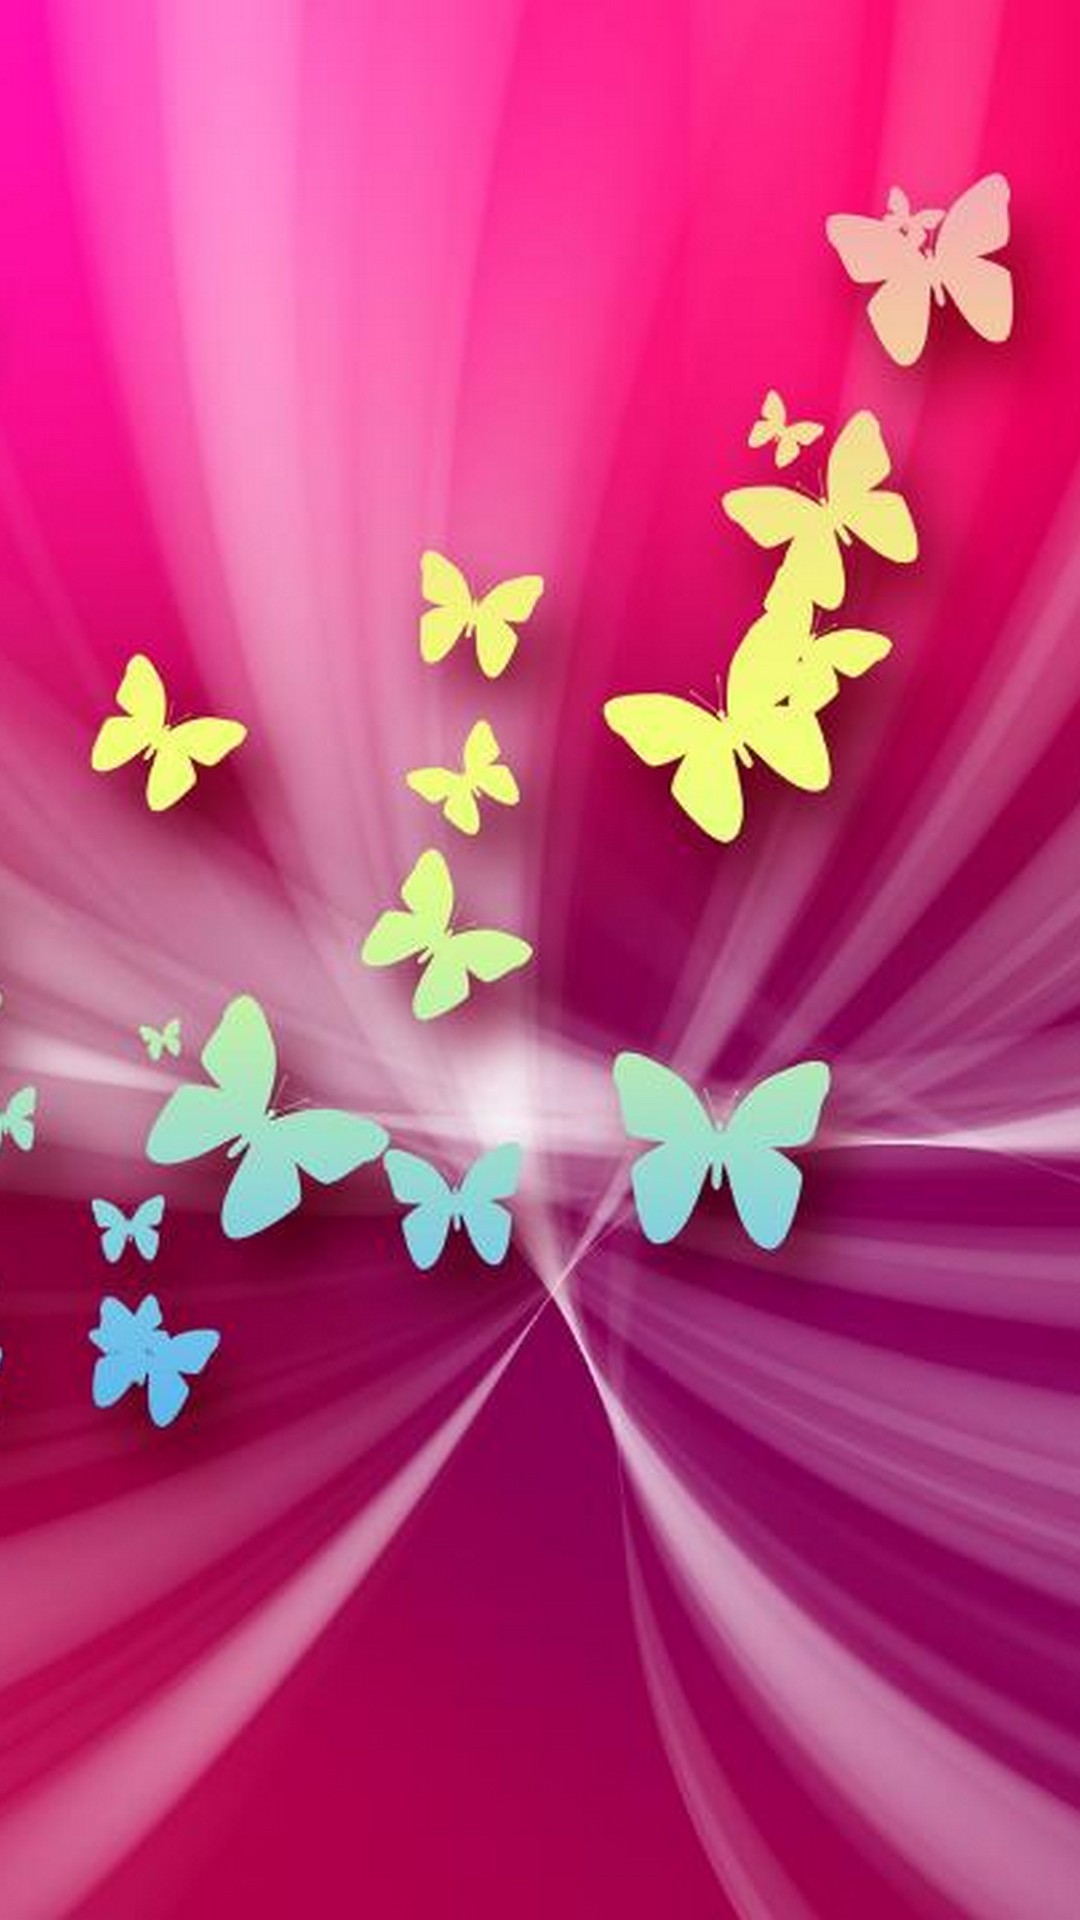 Pink Butterfly Backgrounds For Android with HD resolution 1080x1920